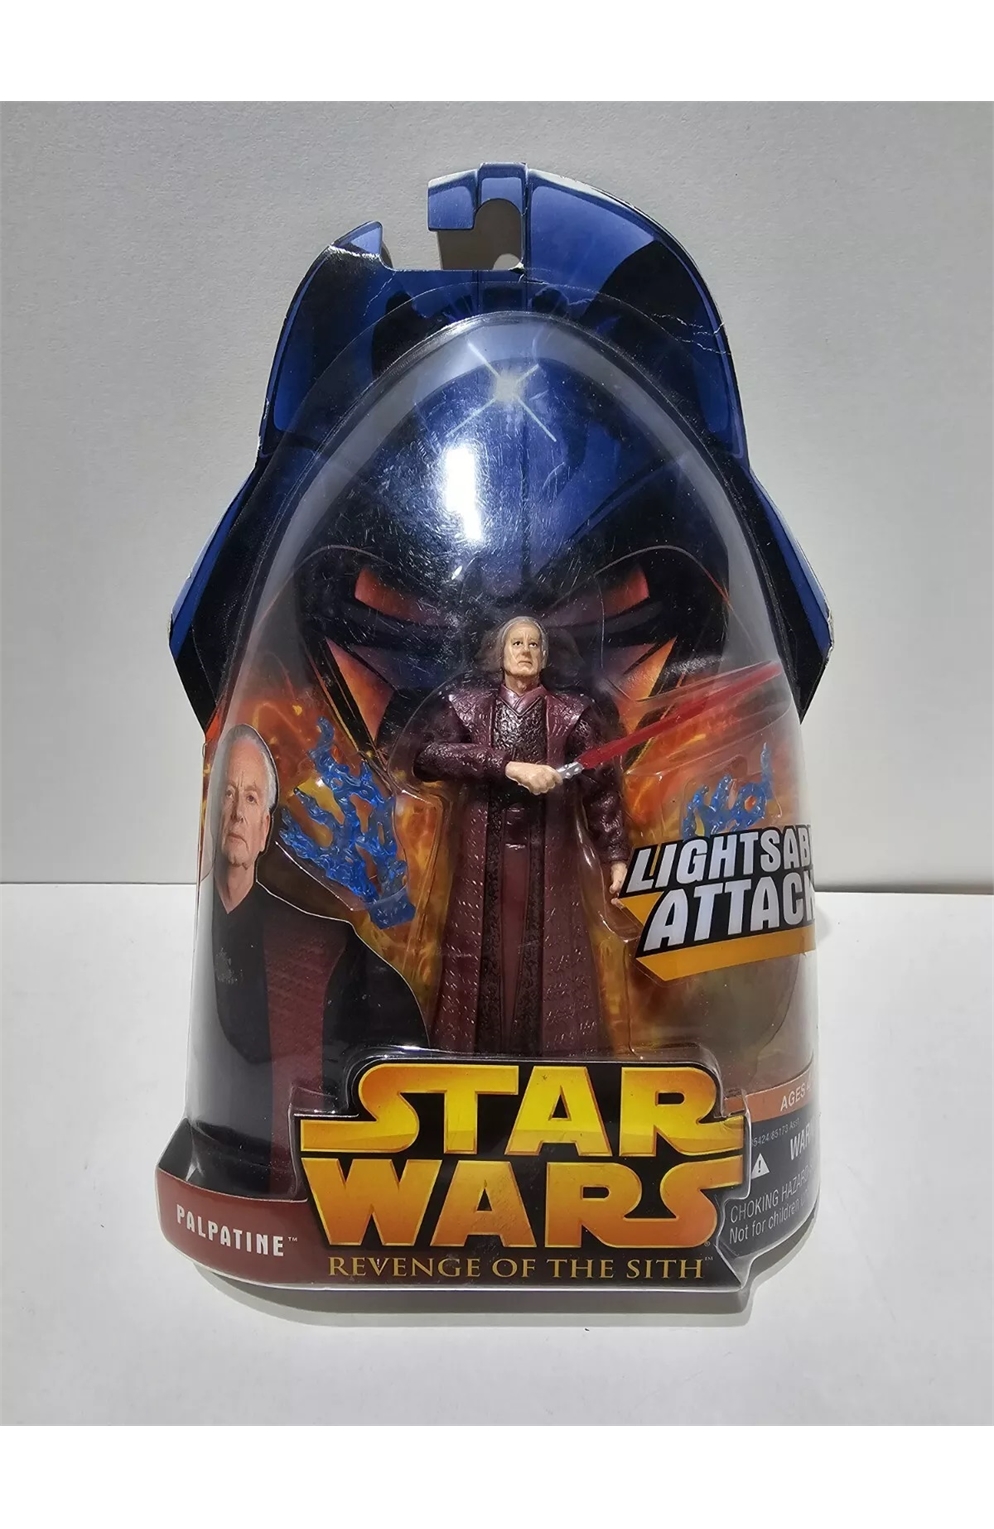 Star Wars Revenge of The Sith Lightsaber Attack Palpatine